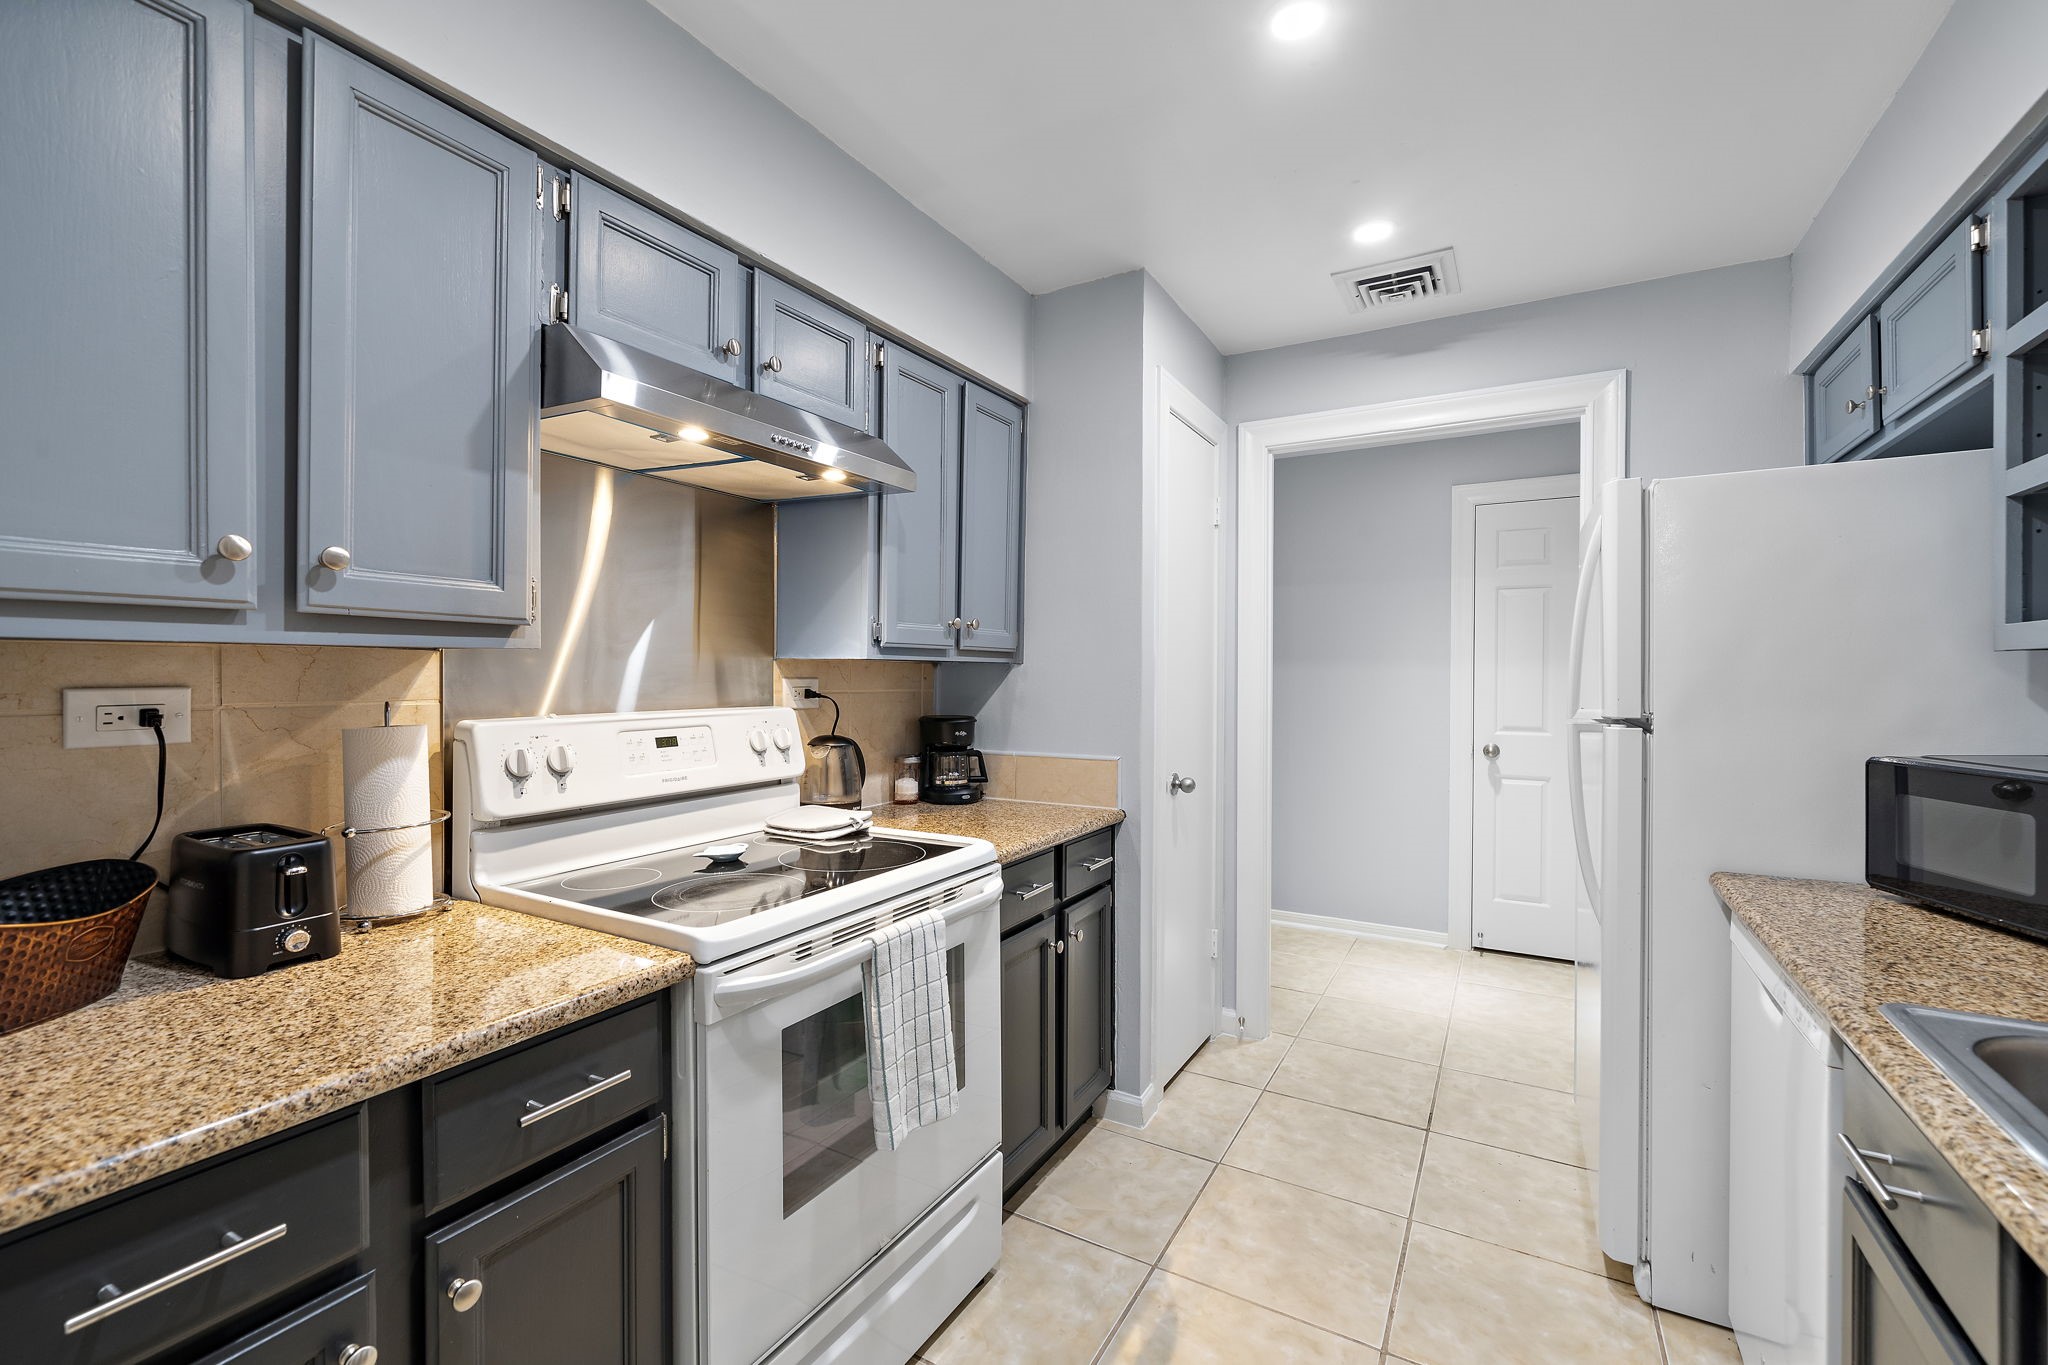 
Compact kitchen with blue cabinets, granite countertops, and stainless steel appliances.